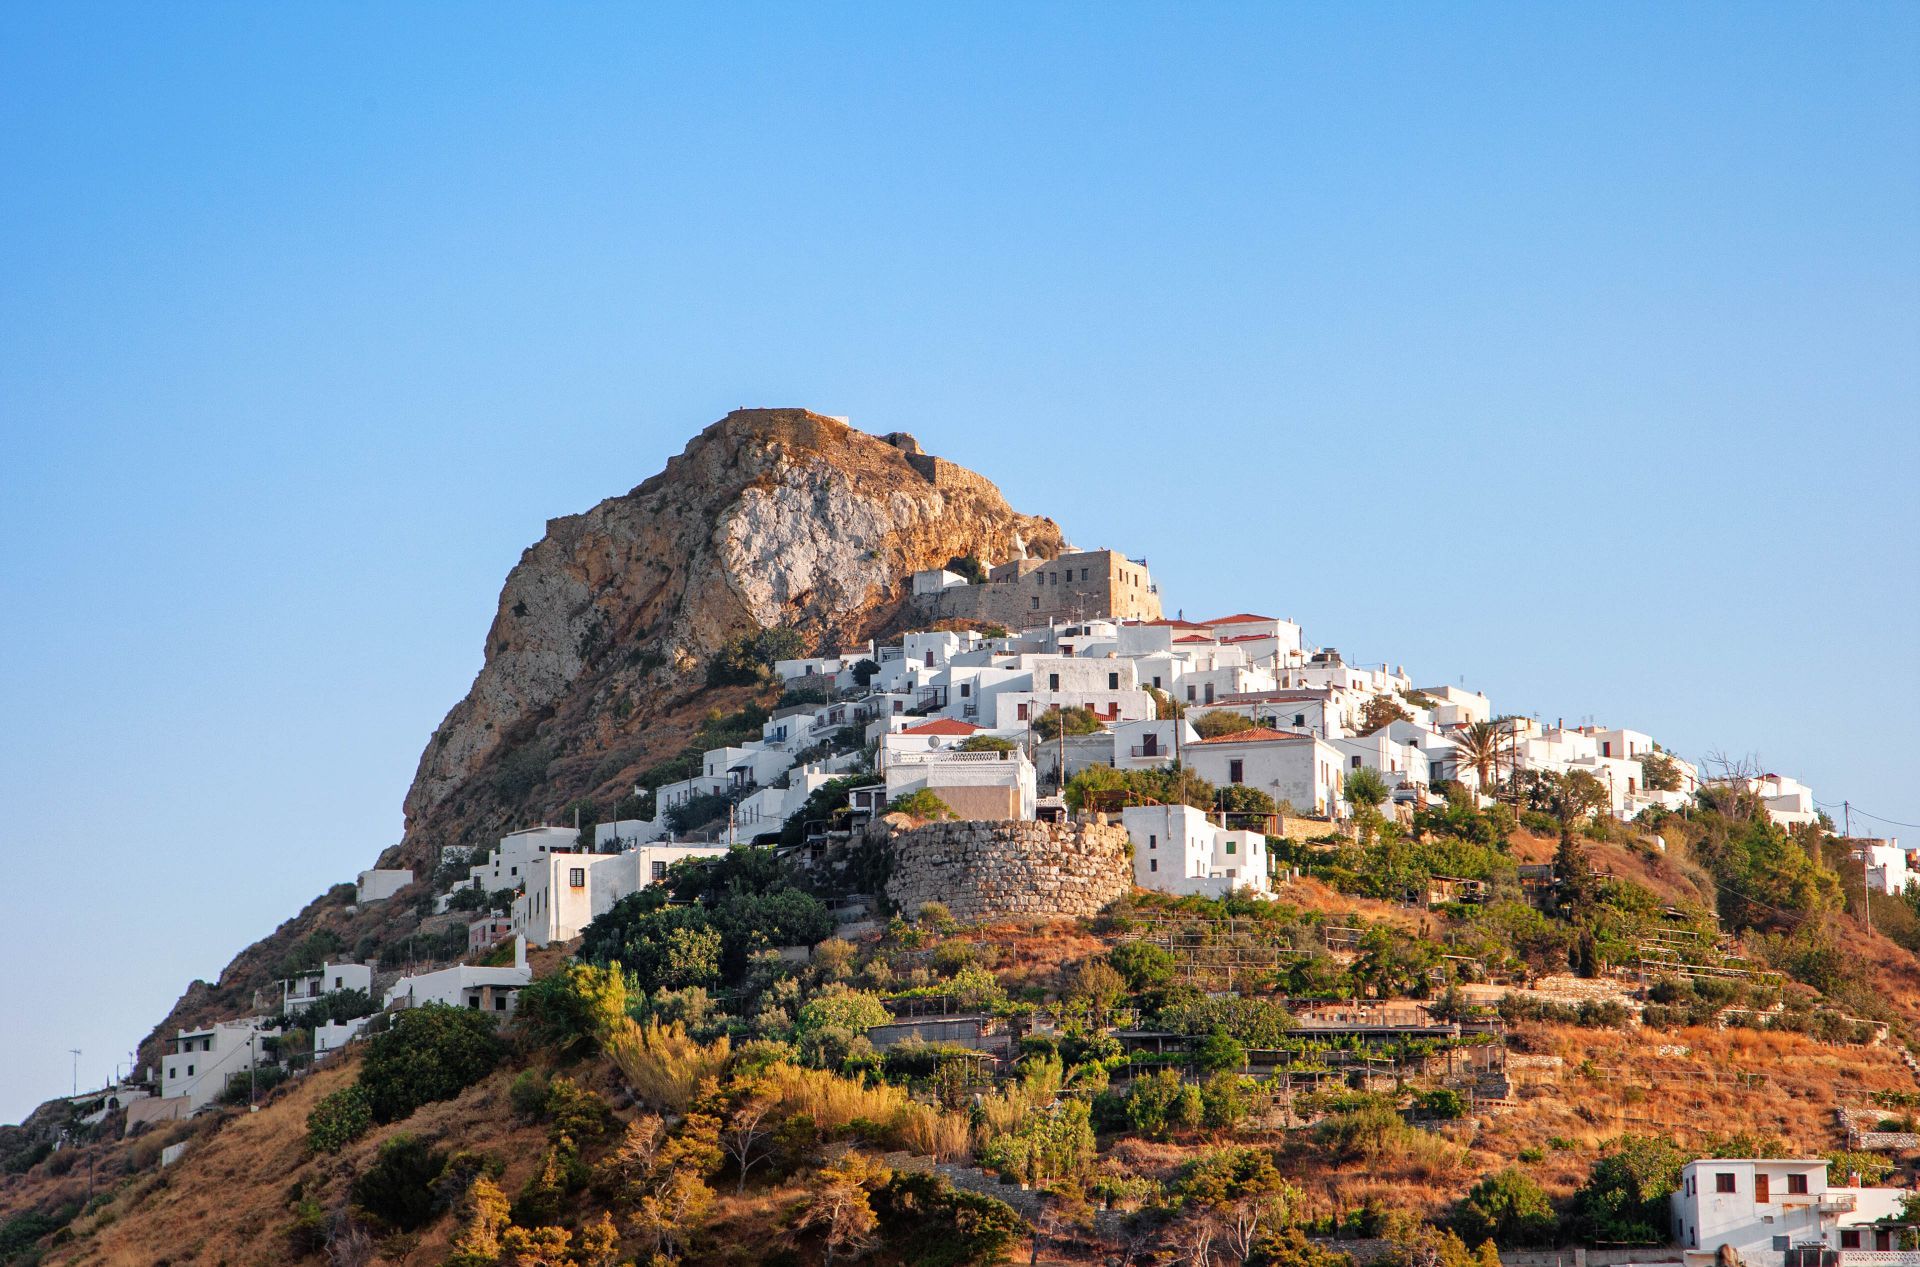 Skyros Greece: Chora village and its famous architecture